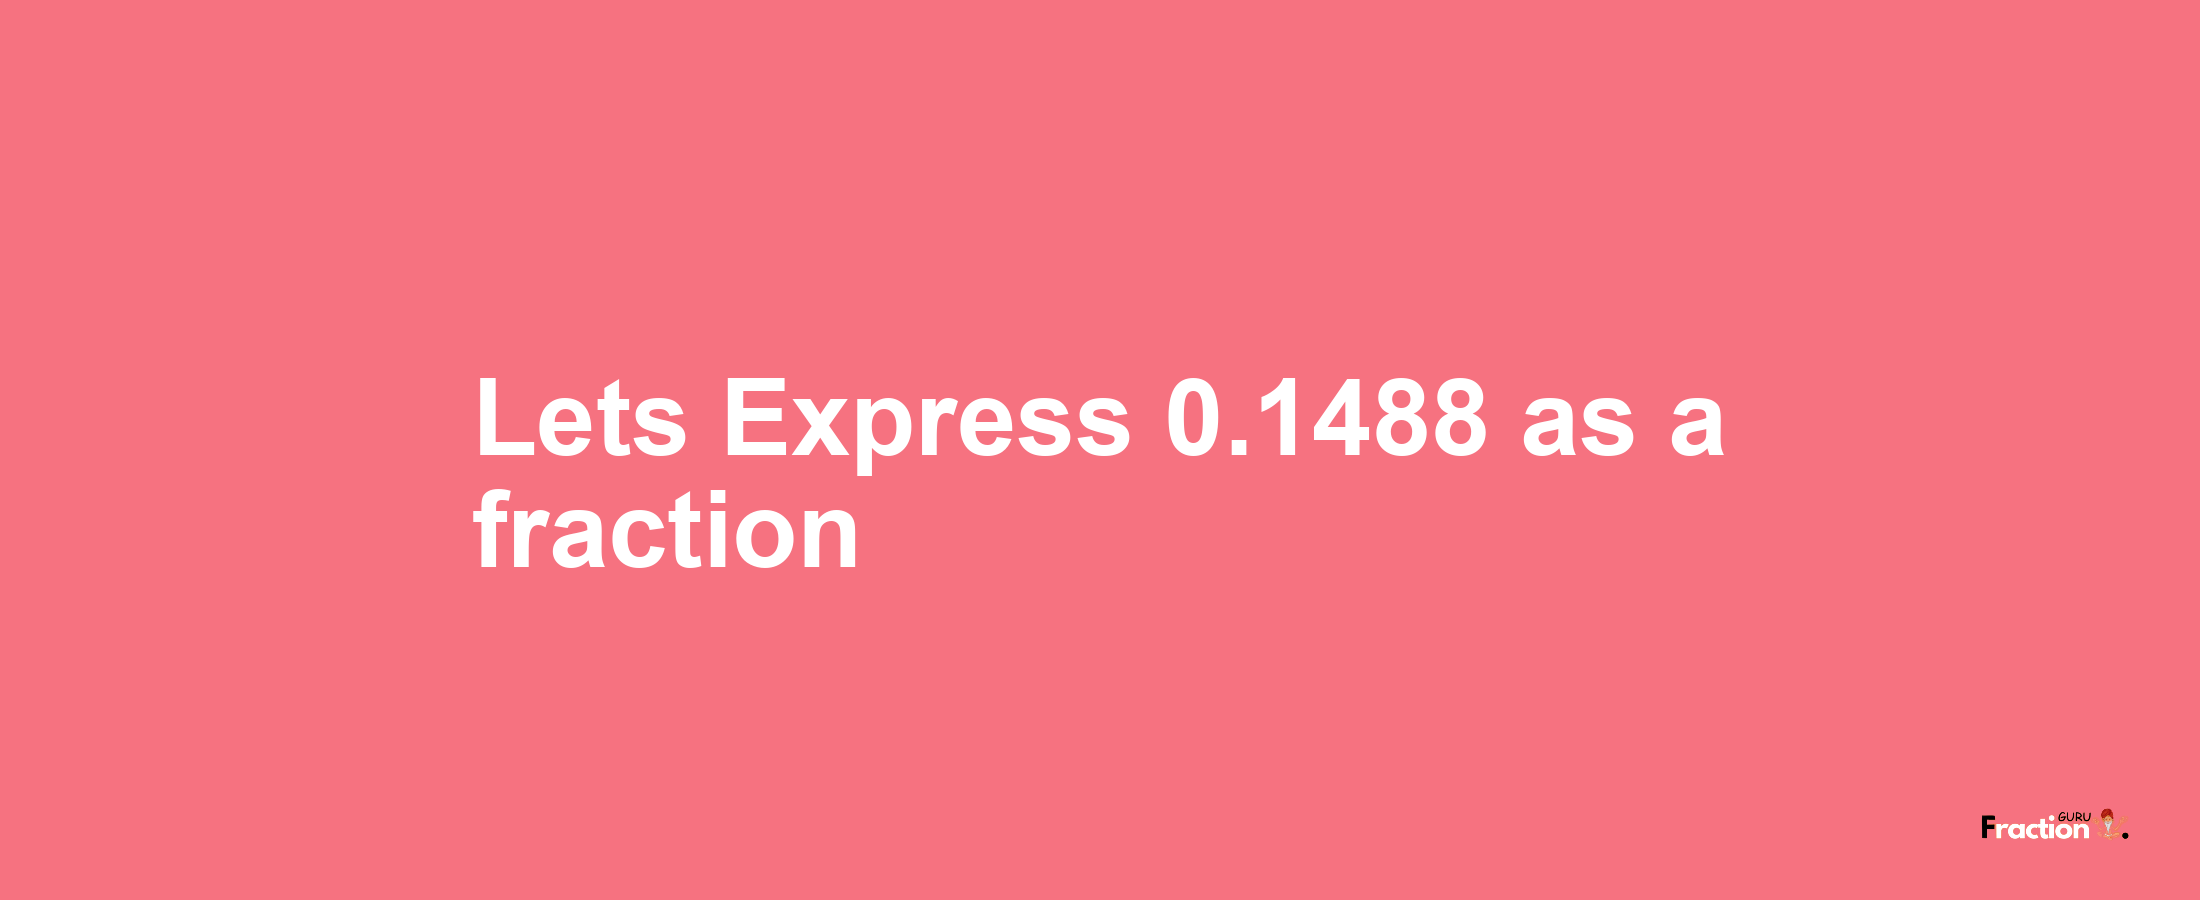 Lets Express 0.1488 as afraction